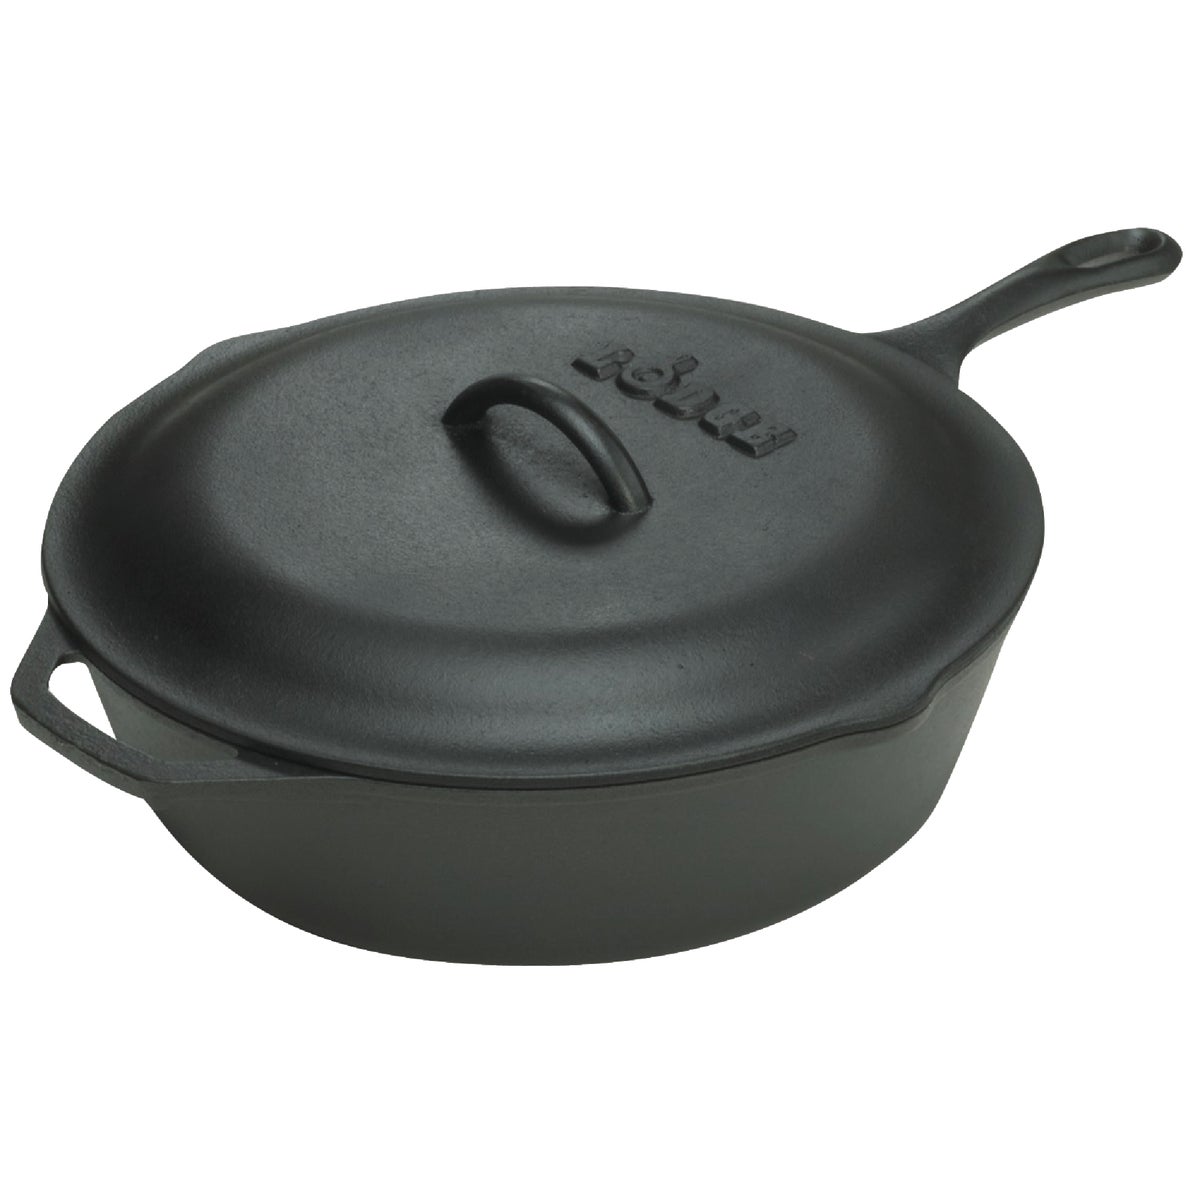 Item 602698, Lodge Cast Iron Skillet is electrostatically coated with a proprietary 